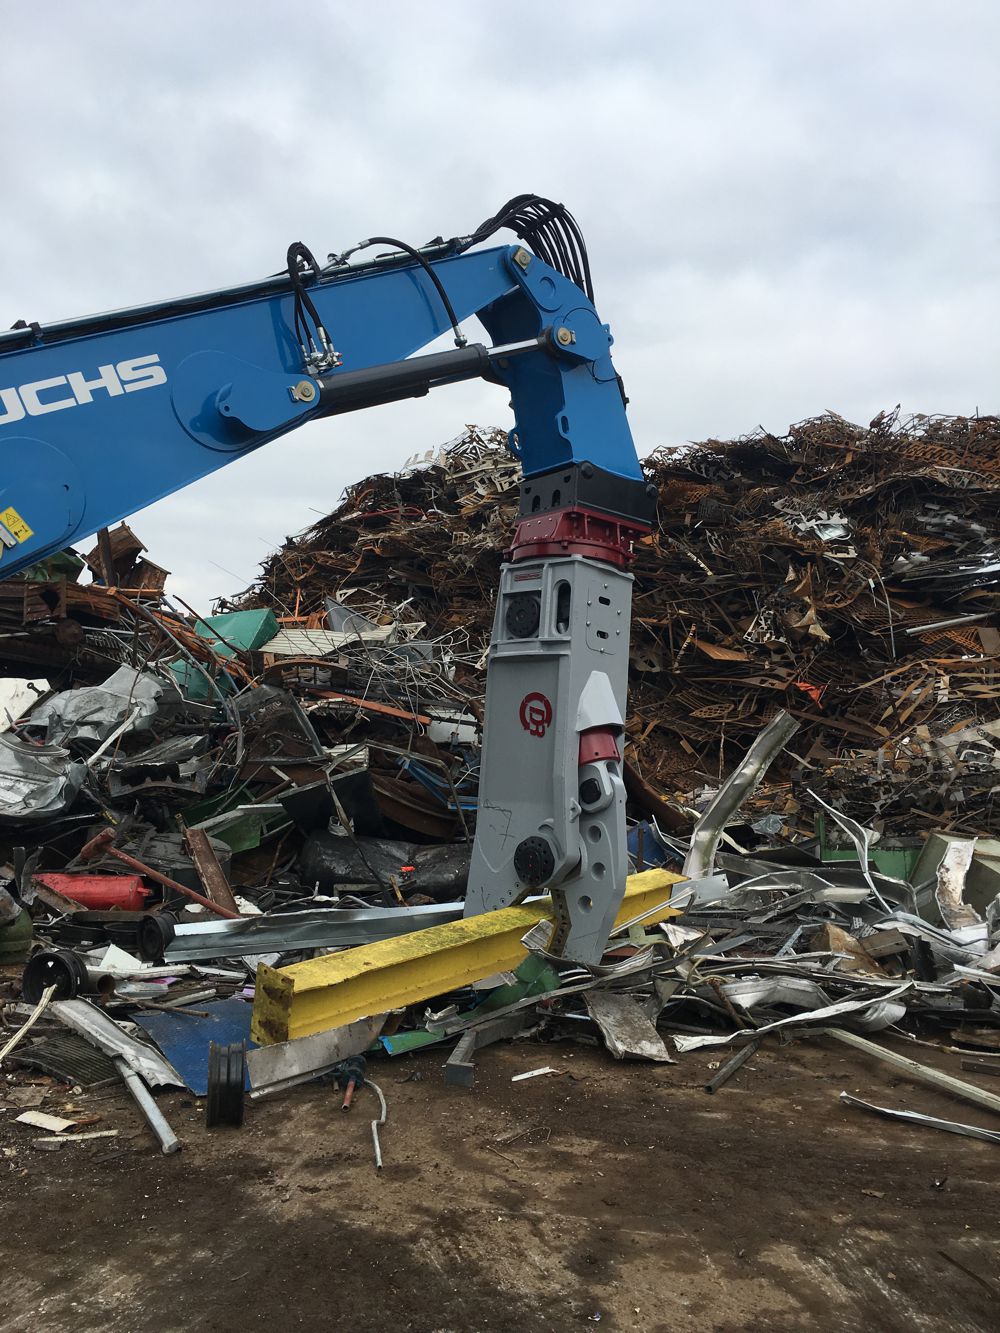  New KINSHOFER Series of Hydraulic Mobile Shears Features Industry-Leading Power-to-Weight Ratio and Cycle Times